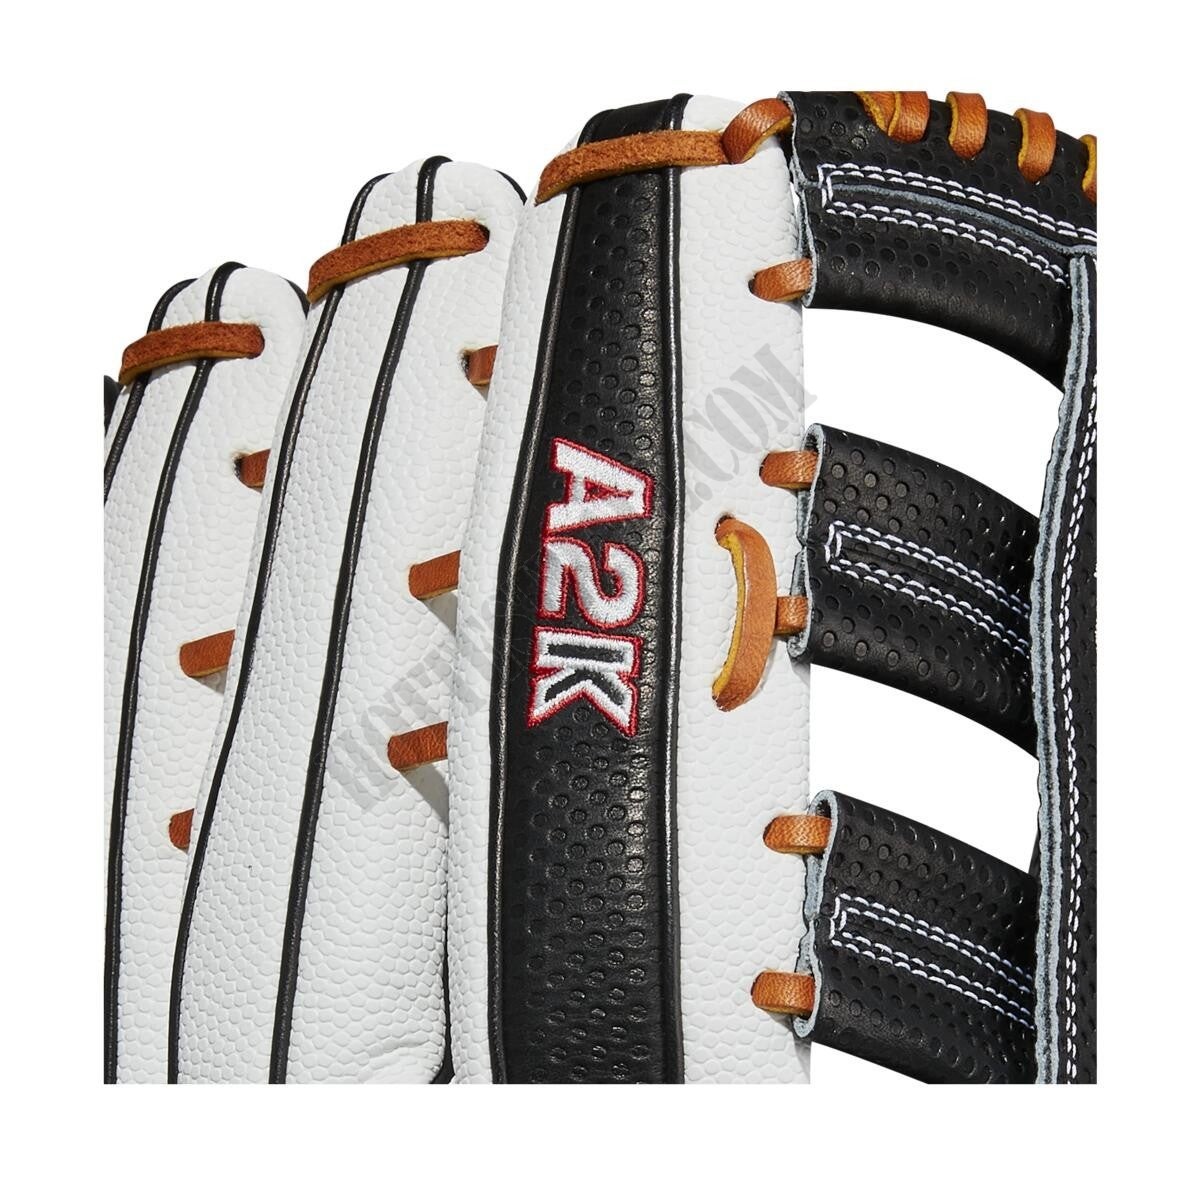 2021 A2K SC1775SS 12.75" Outfield Baseball Glove - Limited Edition ● Wilson Promotions - -6